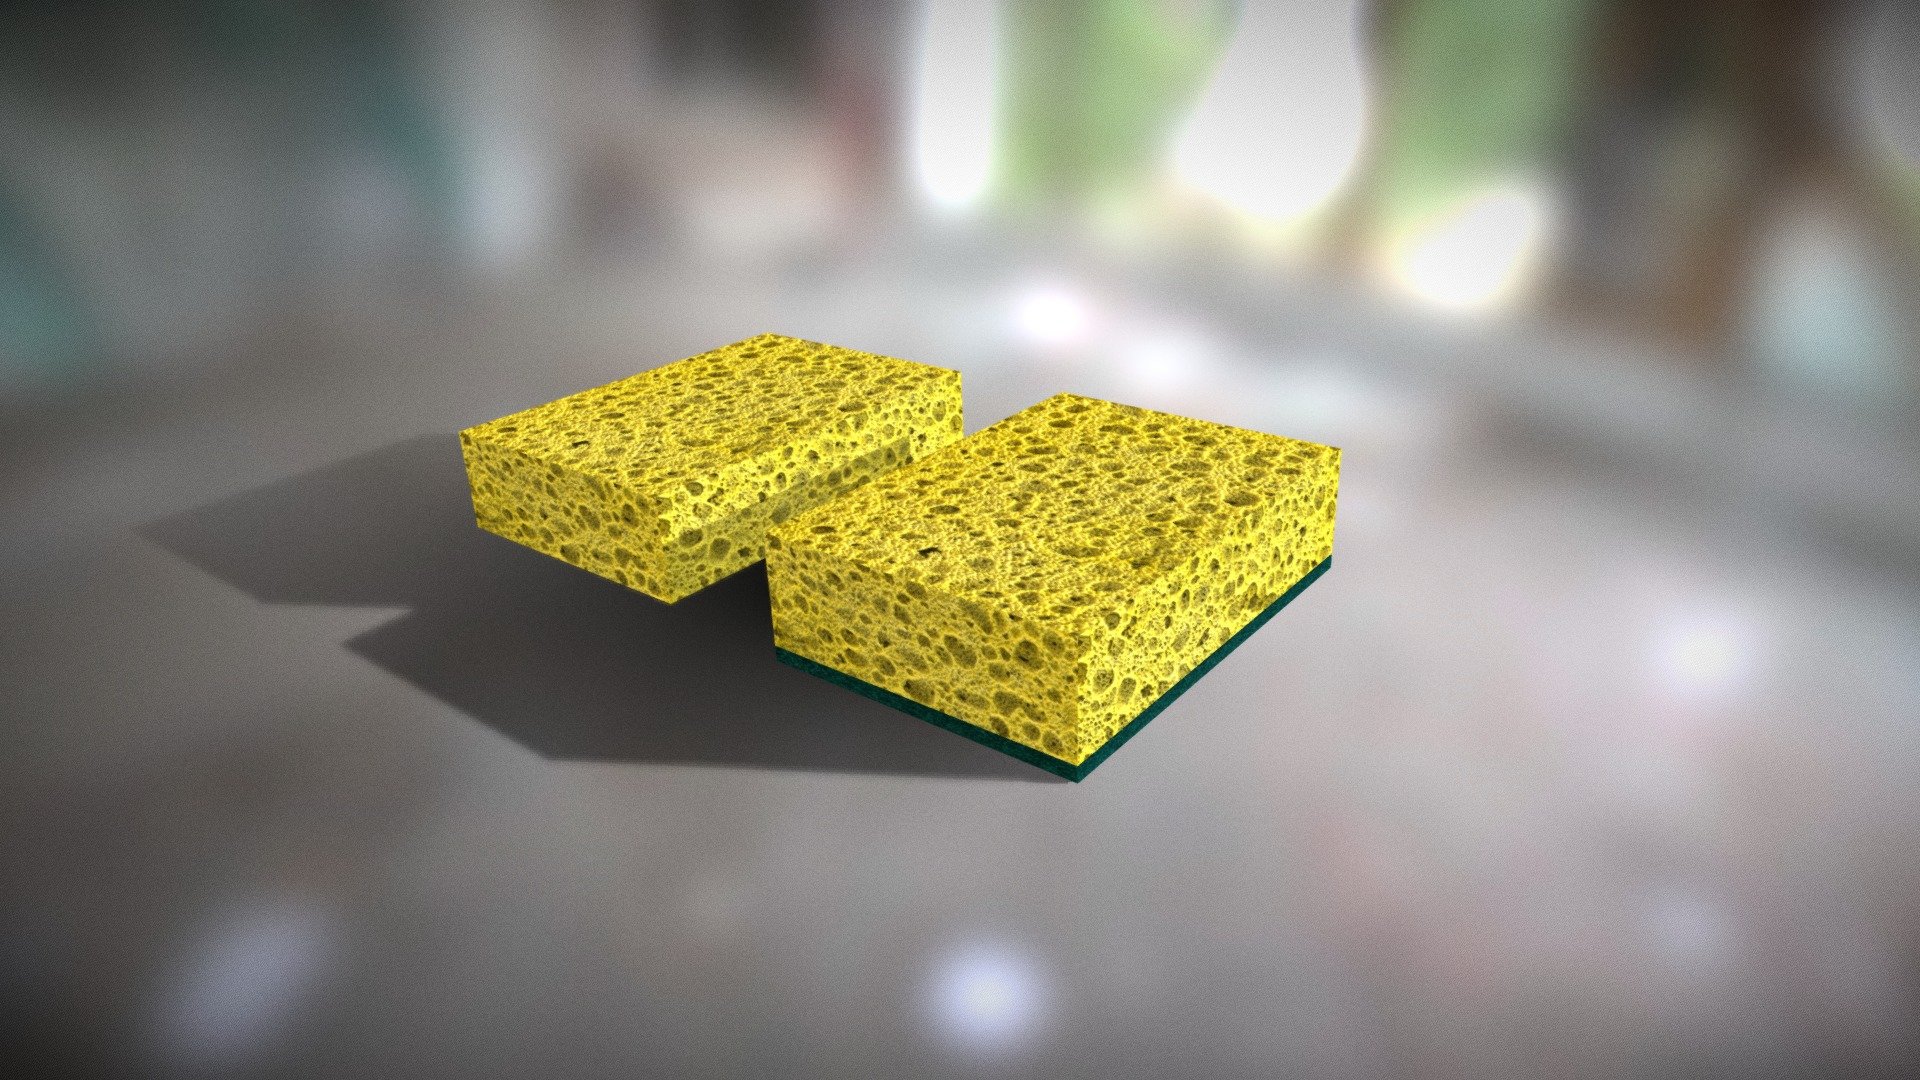 Two variations of dish sponges - Dish Sponges - 3D model by robfitzy 3d model